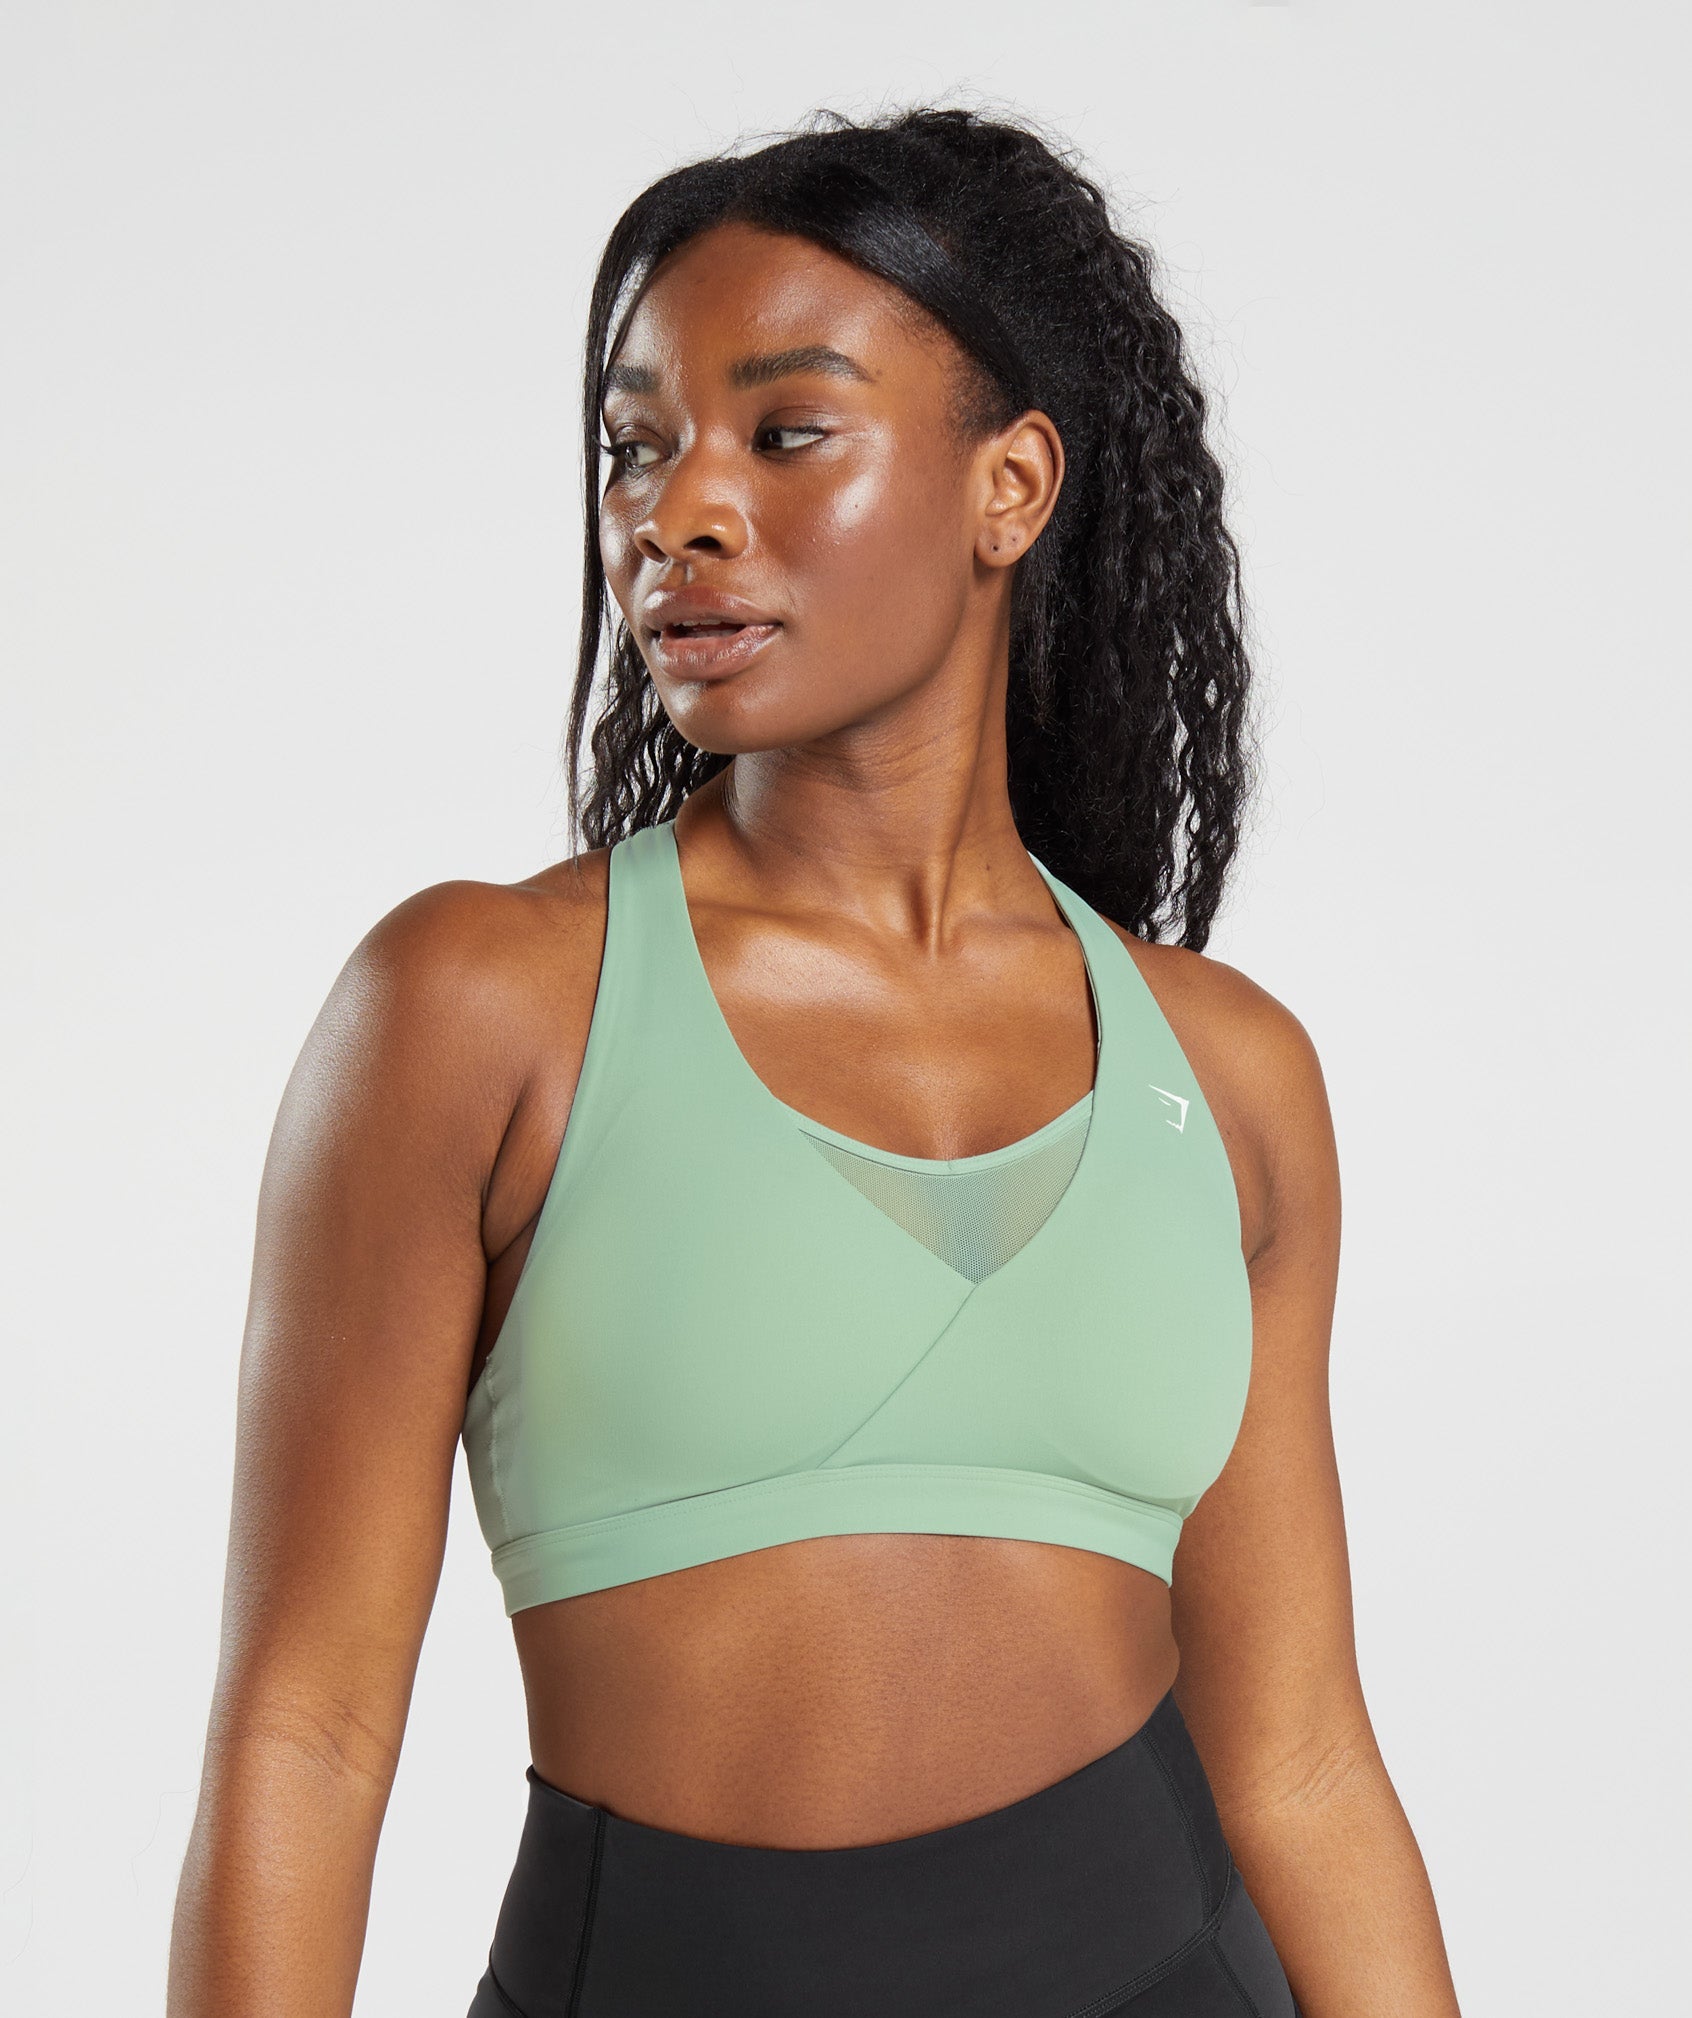 Gymshark sports bra with suspender straps and zip front size Xs/Sm - $23 -  From Jami